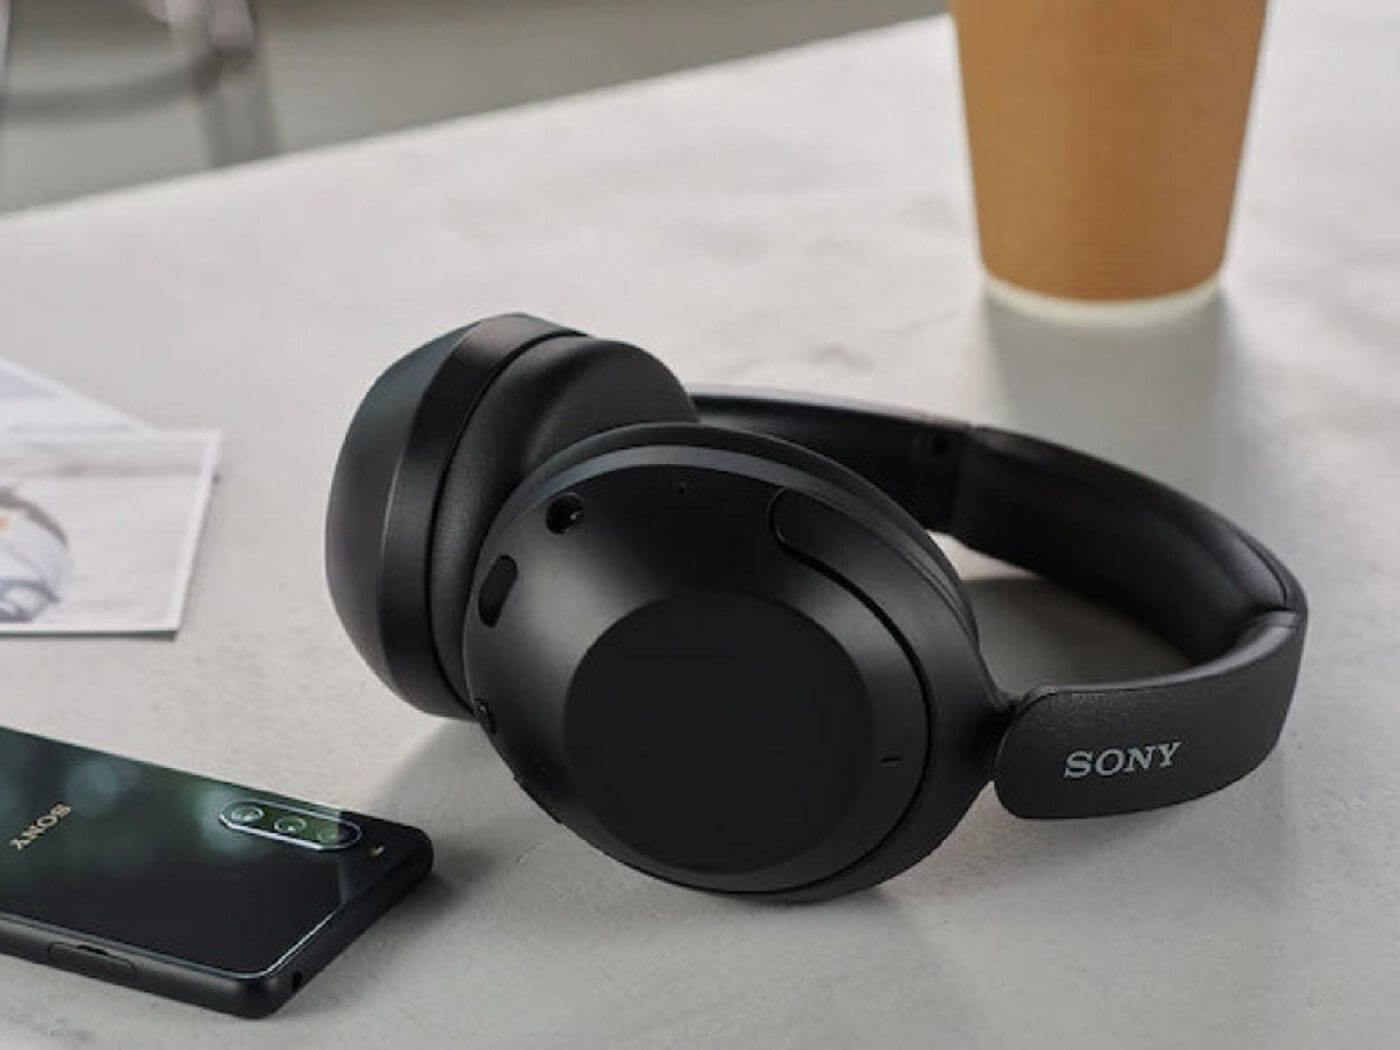 Sony's WF-C500 is its most affordable true wireless earbuds yet